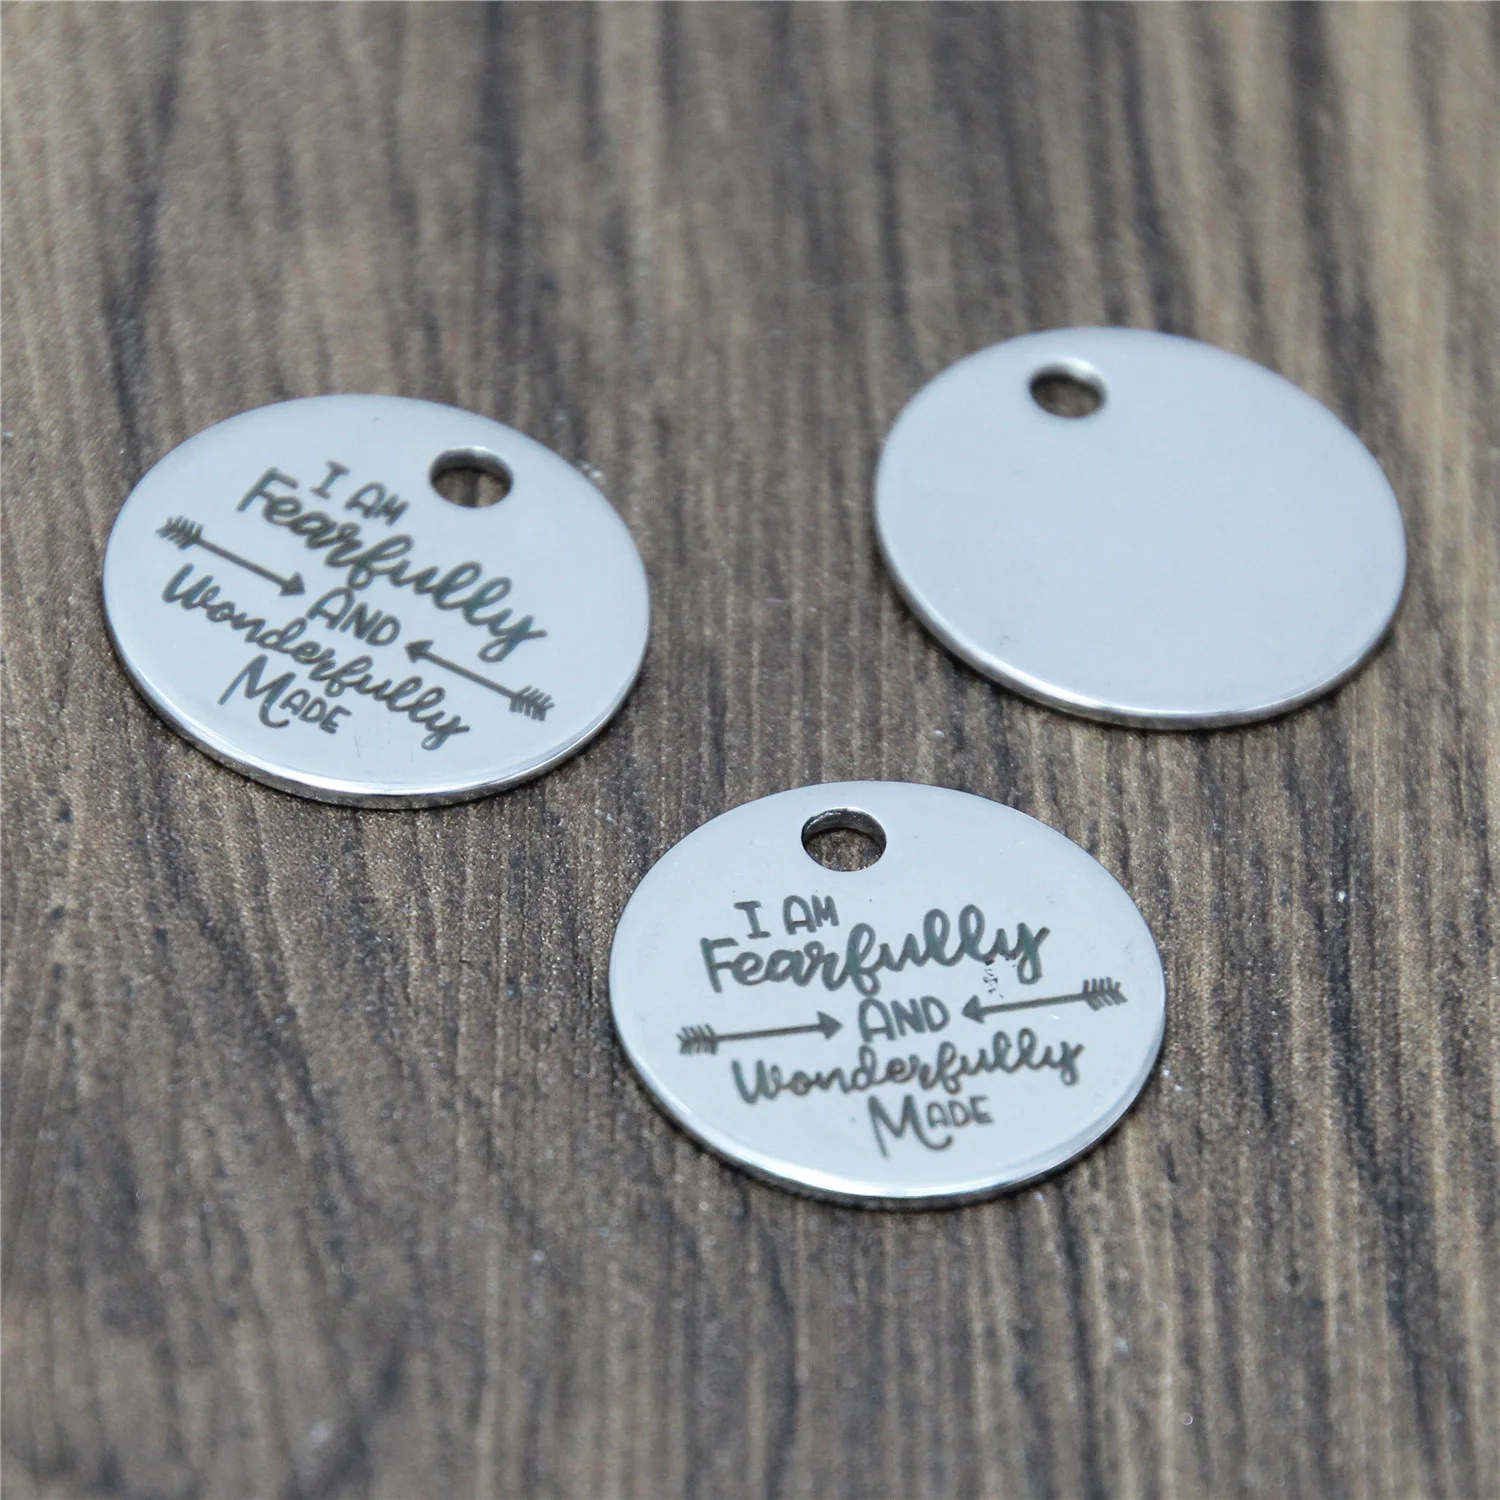 

10pcs/lot Psalm charm I am Fearfully and Wonderfully Made message Stainless Steel Charm pendant 20mm